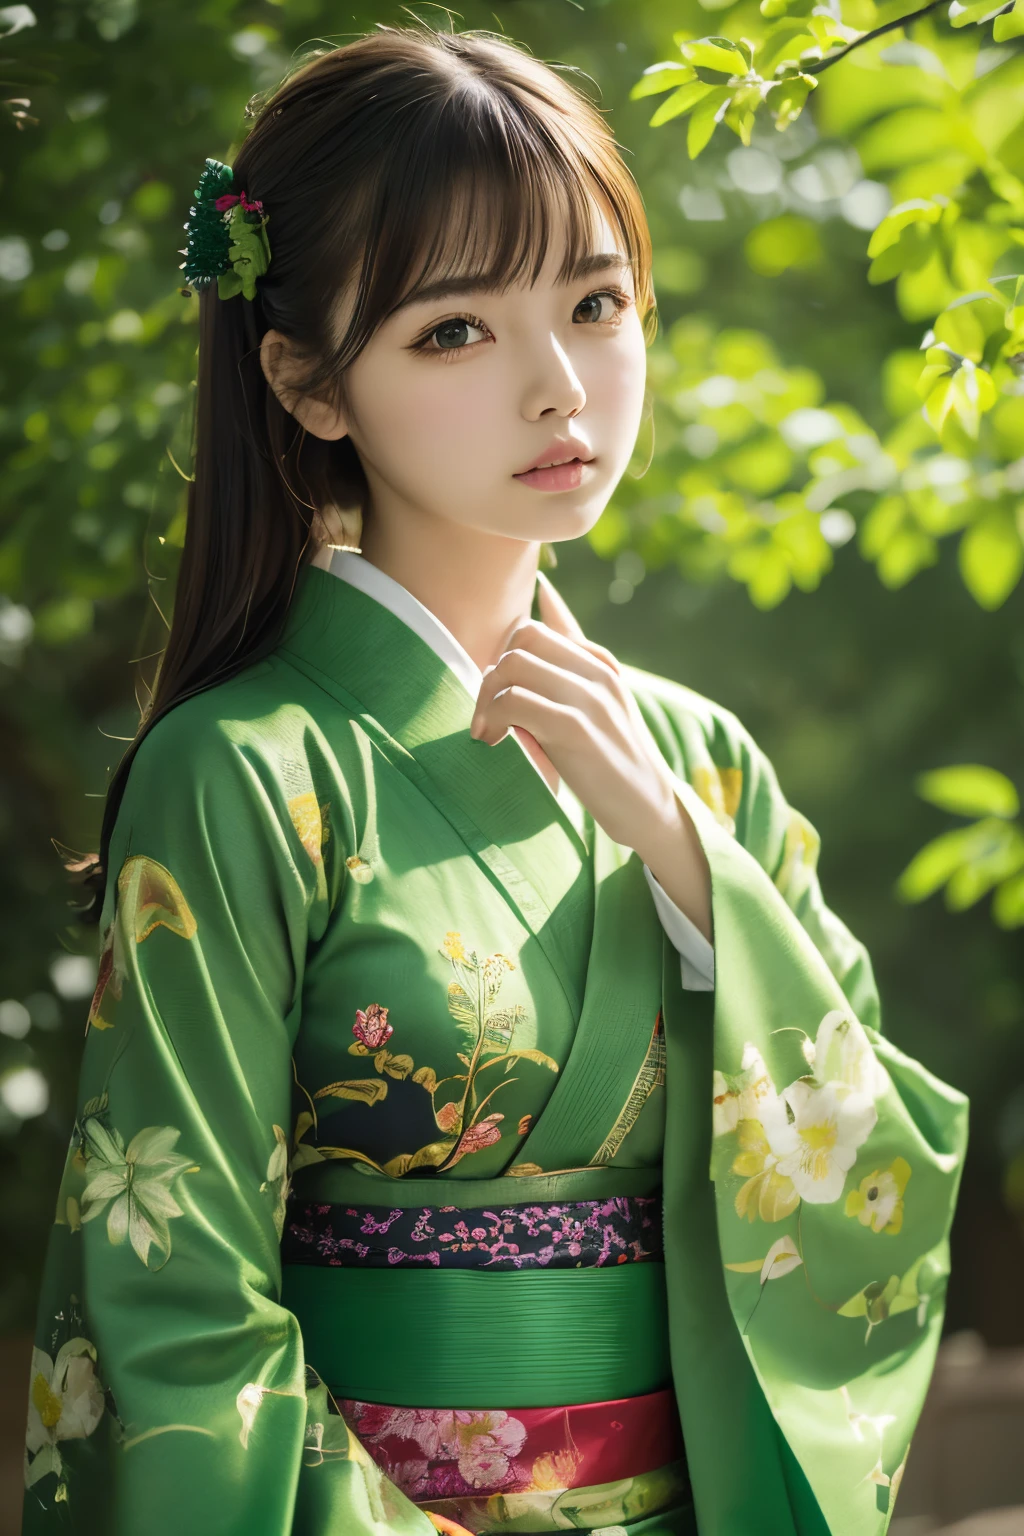 (((Green world:1.3)))、Best Quality, masutepiece, High resolution, (((1girl in))), sixteen years old,(((Eyes are green:1.3)))、Green kimono、((Deep green kimono with red floral pattern)), Tindall Effect, Realistic, Shadow Studio,Ultramarine Lighting, dual-tone lighting, (High Detail Skins: 1.2)、Pale colored lighting、Dark lighting、 Digital SLR, Photo, High resolution, 4K, 8K, Background blur,Fade out beautifully、Green world